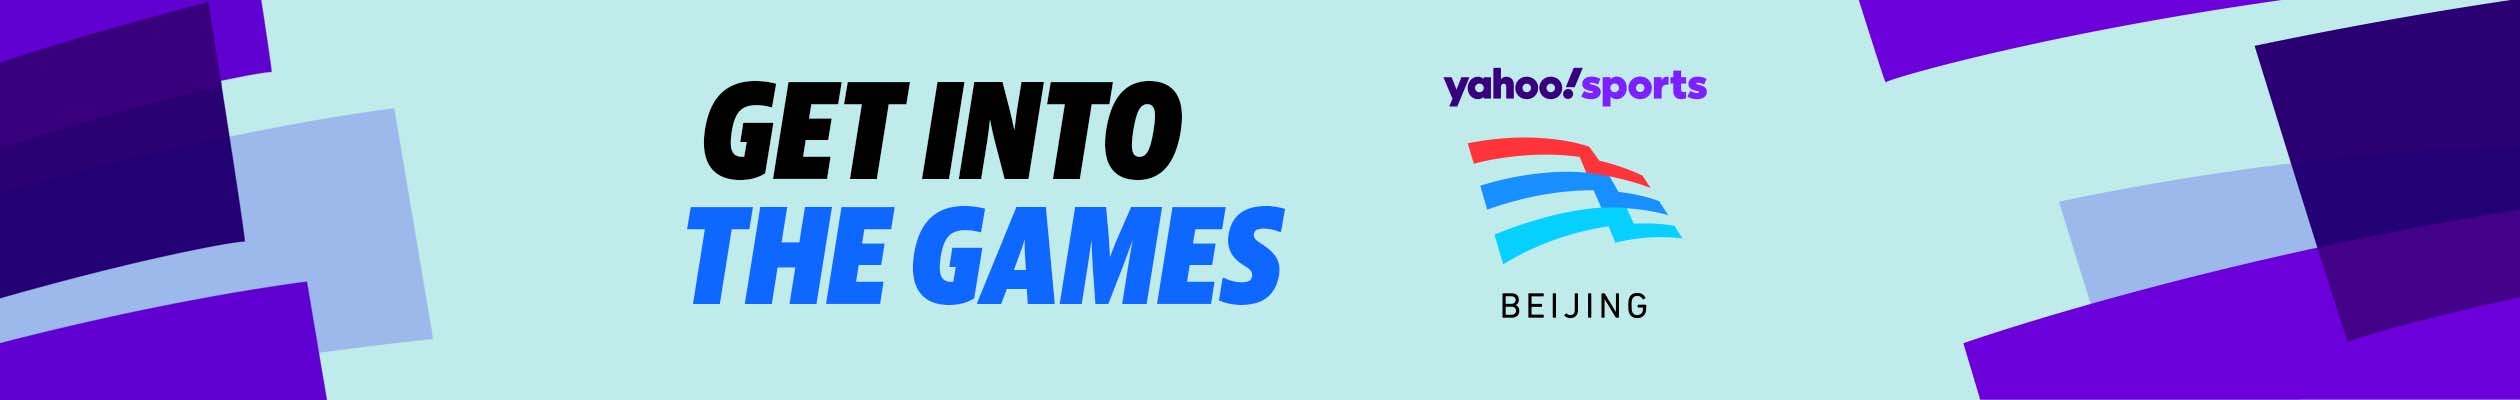 A purple and pale blue banner with horizontal purple rectangles along the left and right side with the text "Get Into The Games" next to a flag-like logo with three horizontal stripes, with the text "Yahoo Sports" and "Beijing" surrounding it. 